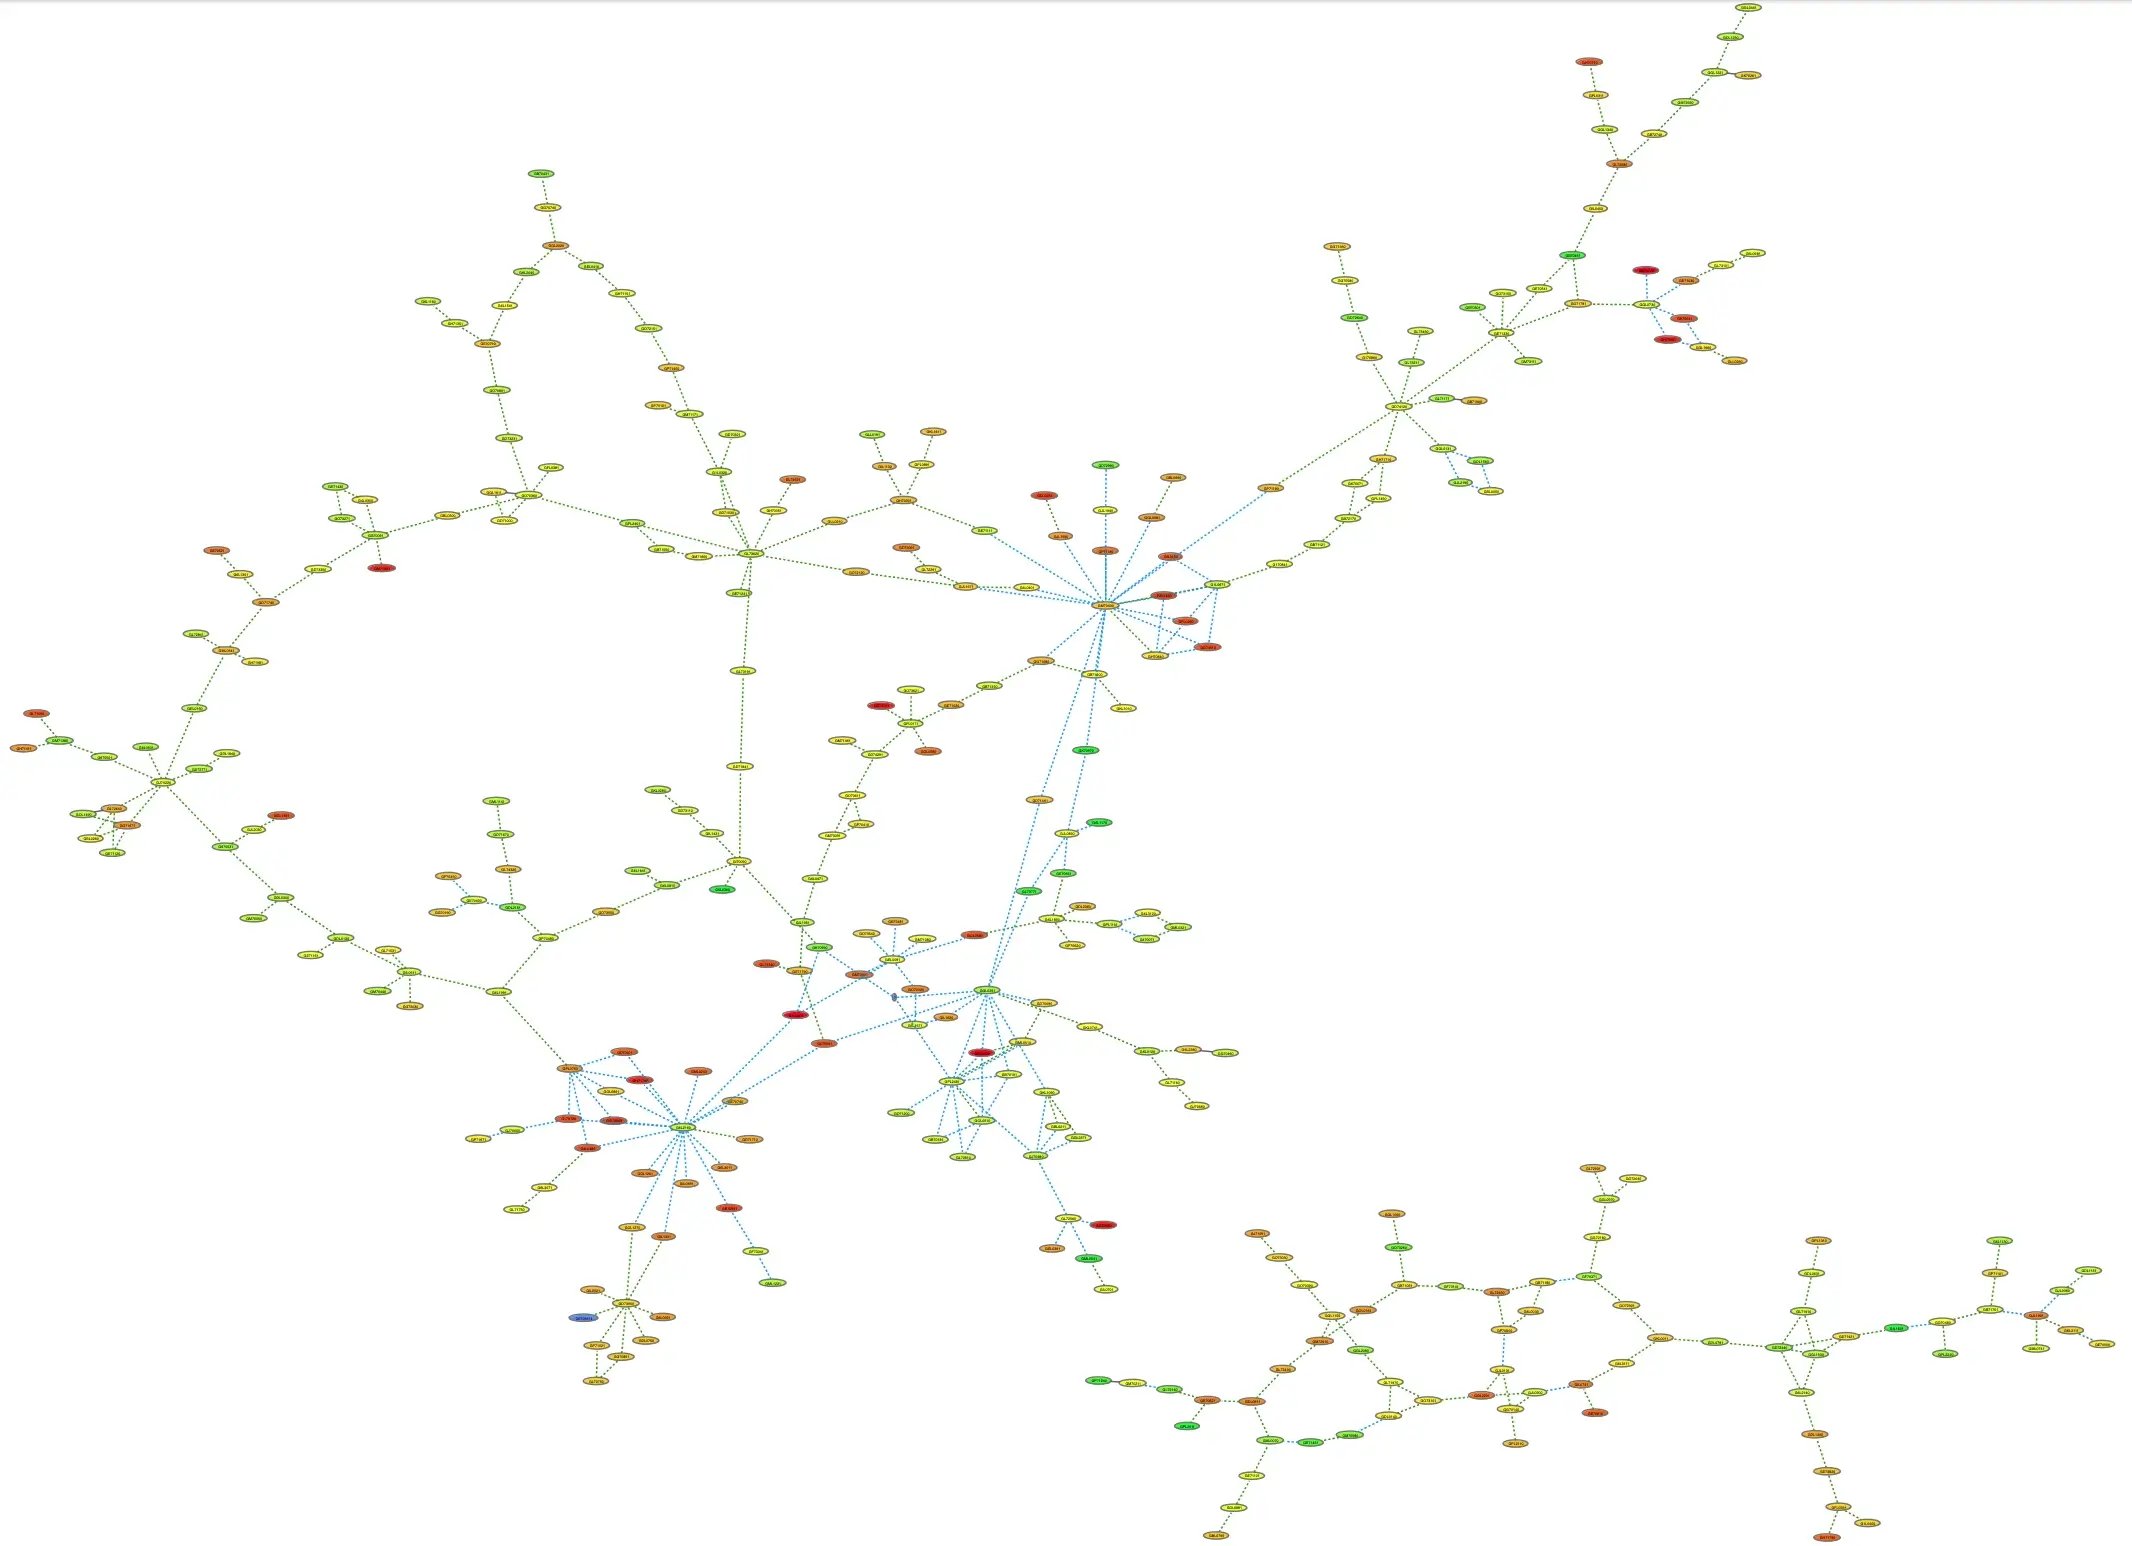 A large graph visualization showing the overall structure of a network produced with Tom Sawyer Software Perspectives